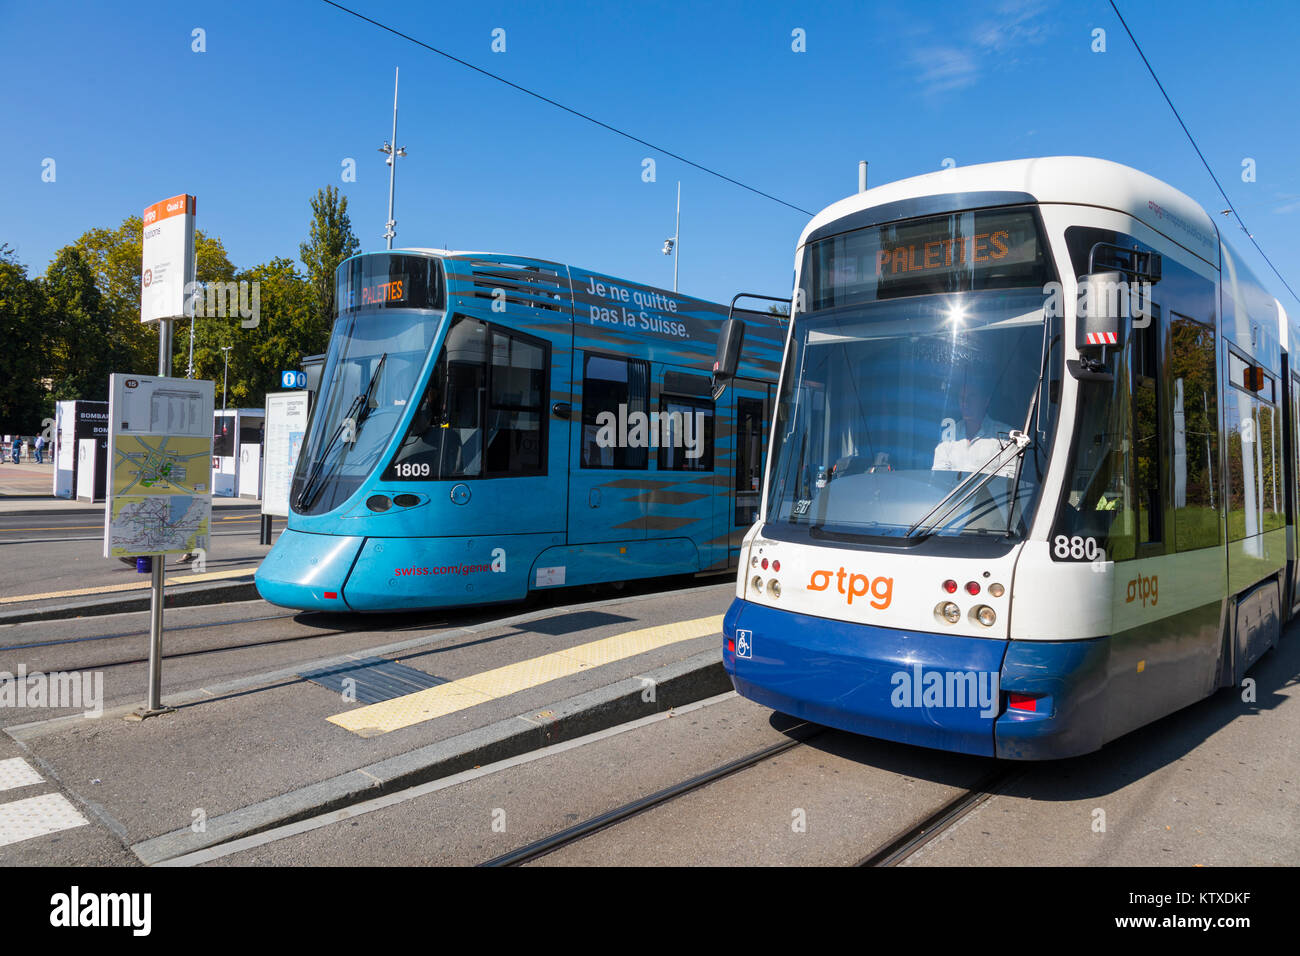 Flexity Outlook Cityrunner on right and Tango on left, trams at Place des Nations, Geneva, Switzerland, Europe Stock Photo